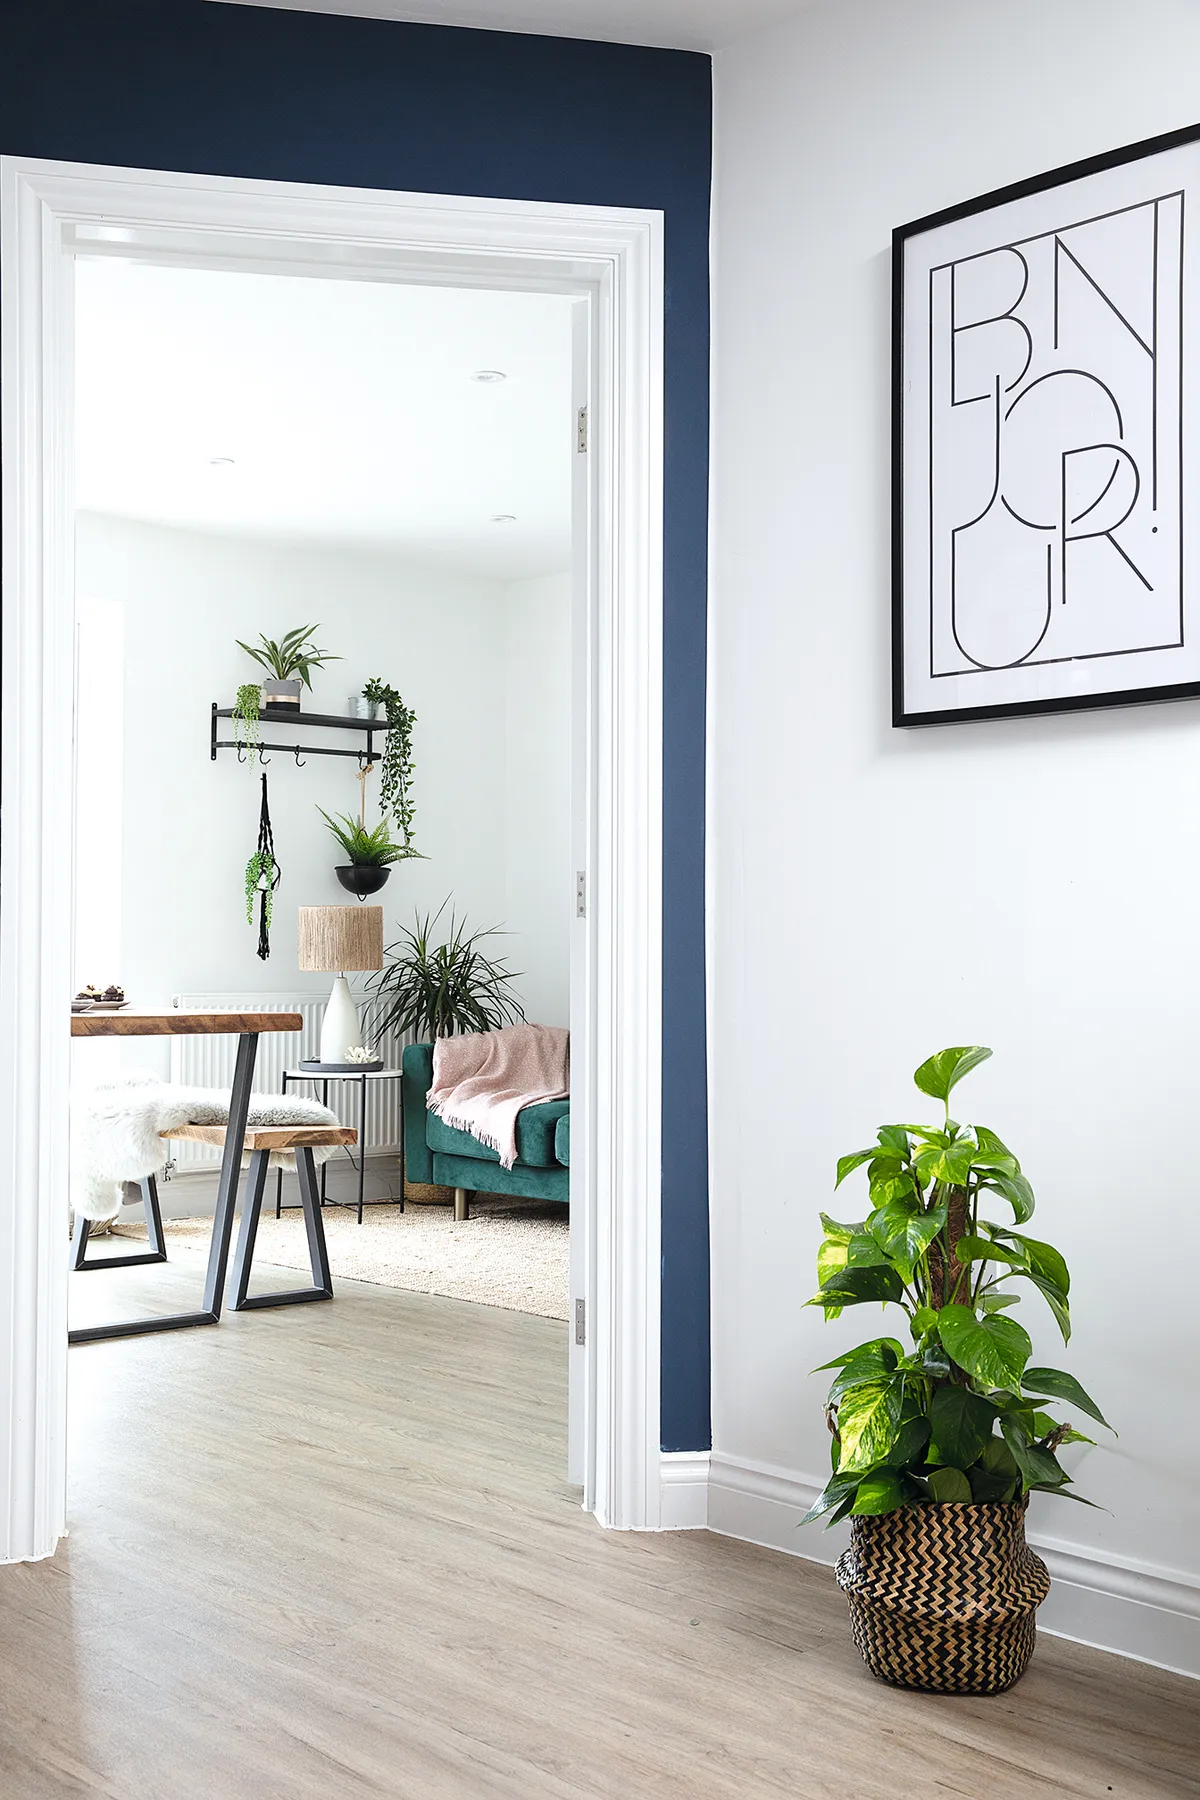 ‘I chose Quayside oak flooring by Camaro to run throughout the ground floor. It has a lovely wood effect but with a grey tone to tie in with the kitchen units. The Bonjour print is from H&M Home and I picked up the plant basket at Habitat’